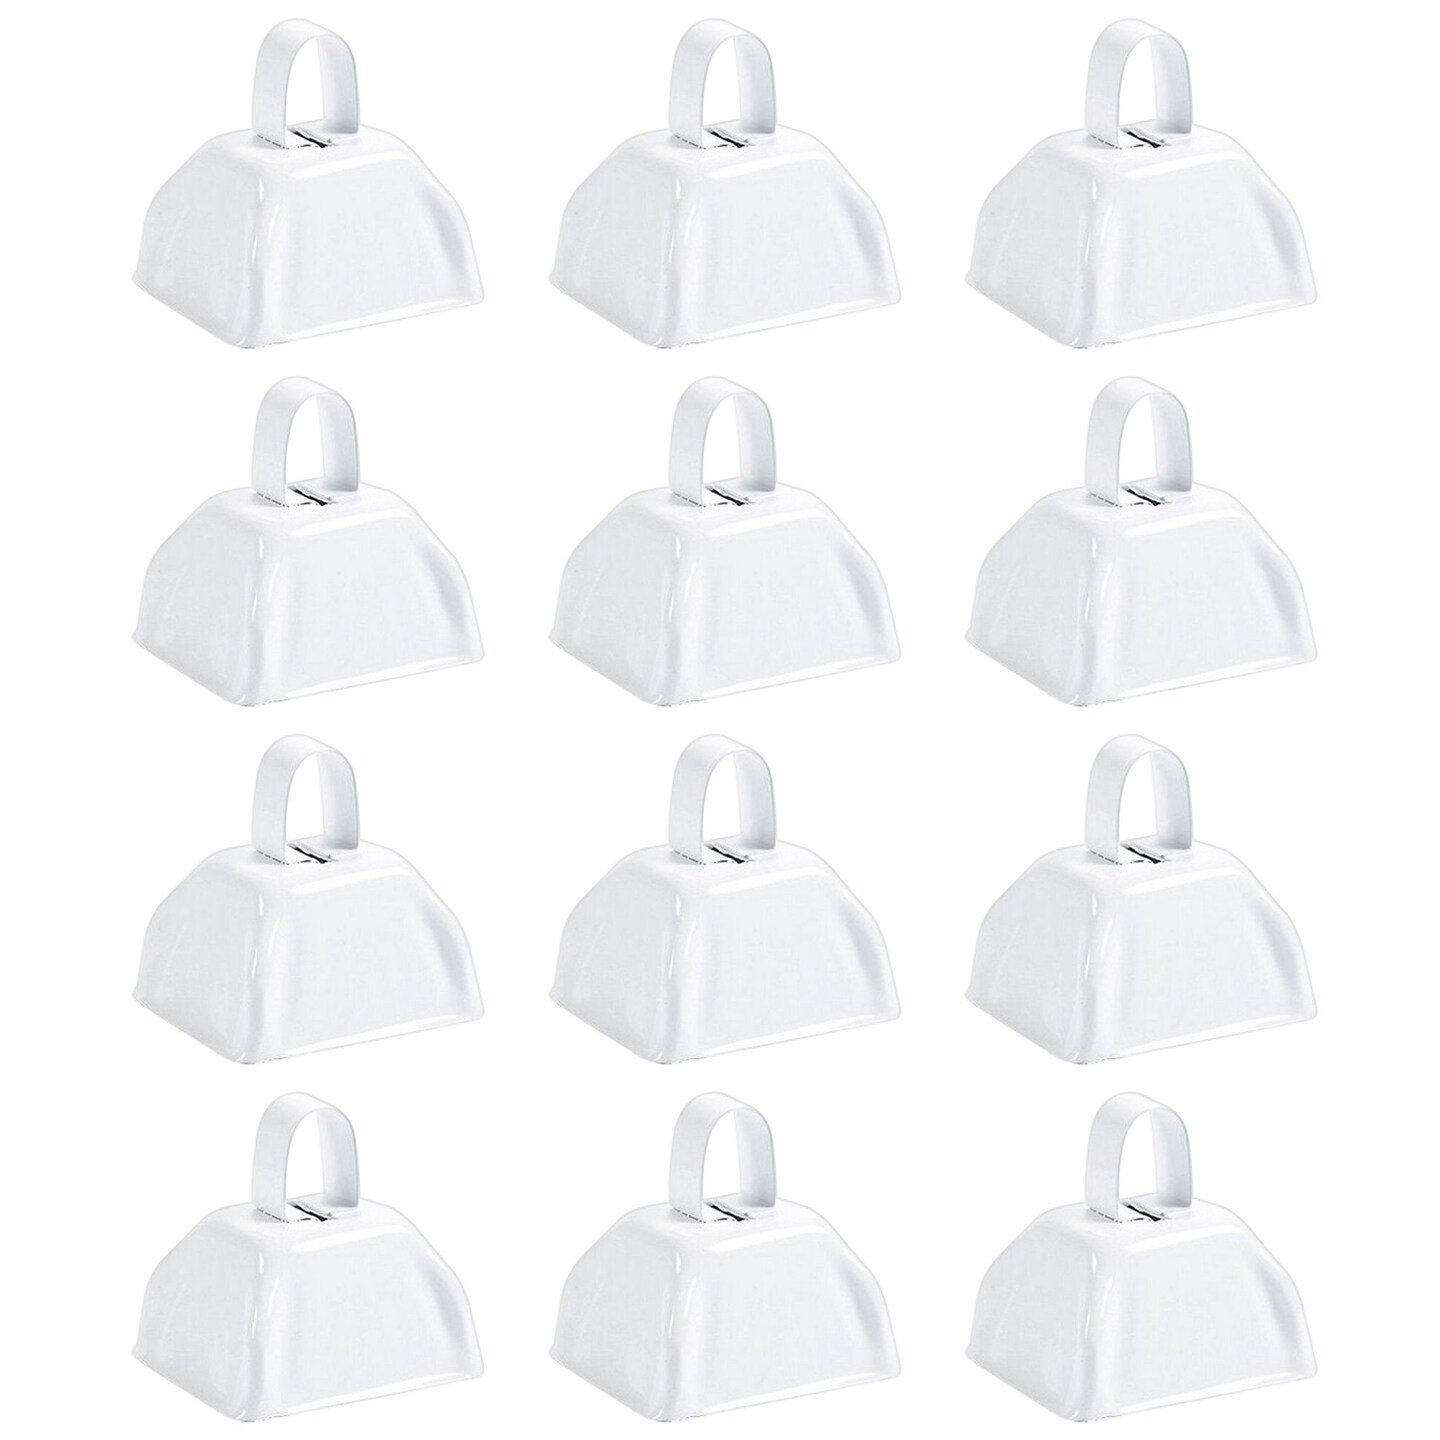  24 Pcs Metal Cowbell with Handle Cow Bells Noise Makers for  Sporting Events Small Cow Bell Loud Bells Noisemaker Call Bells for Wedding  Cheering Football Games, 3 x 2.8 x 2.5